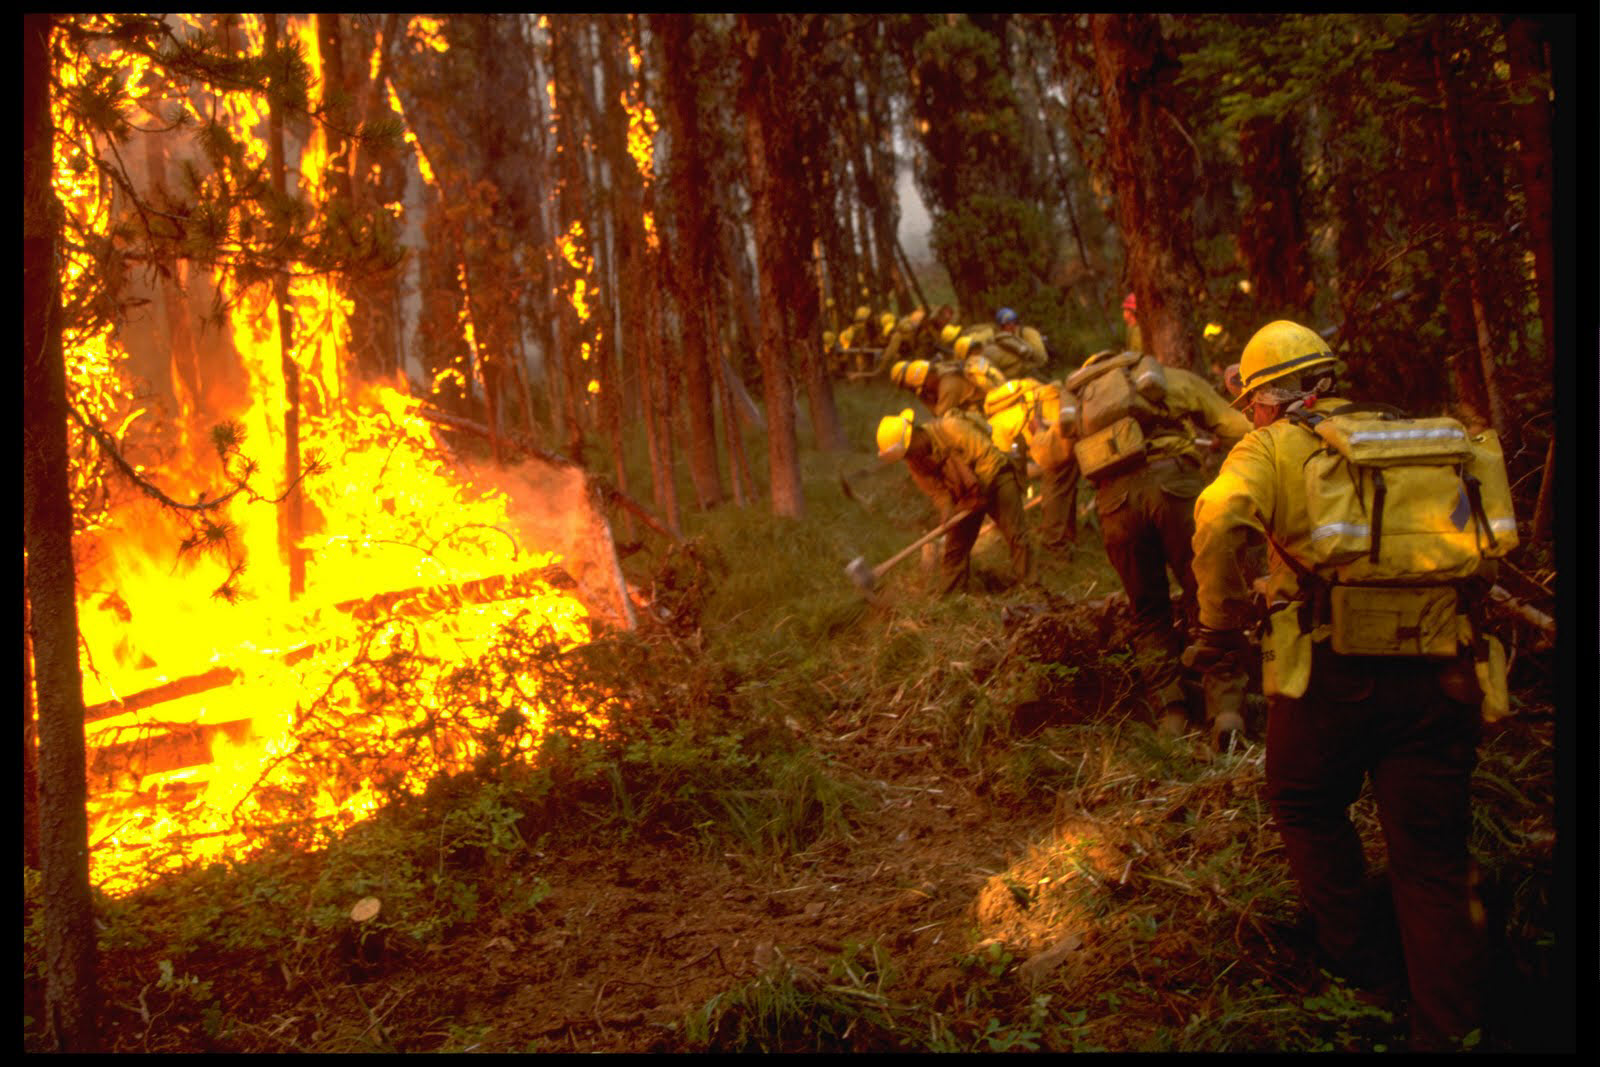 Wildland firefighters digging a fire line using hand tools while a fire burns close to them on one side.